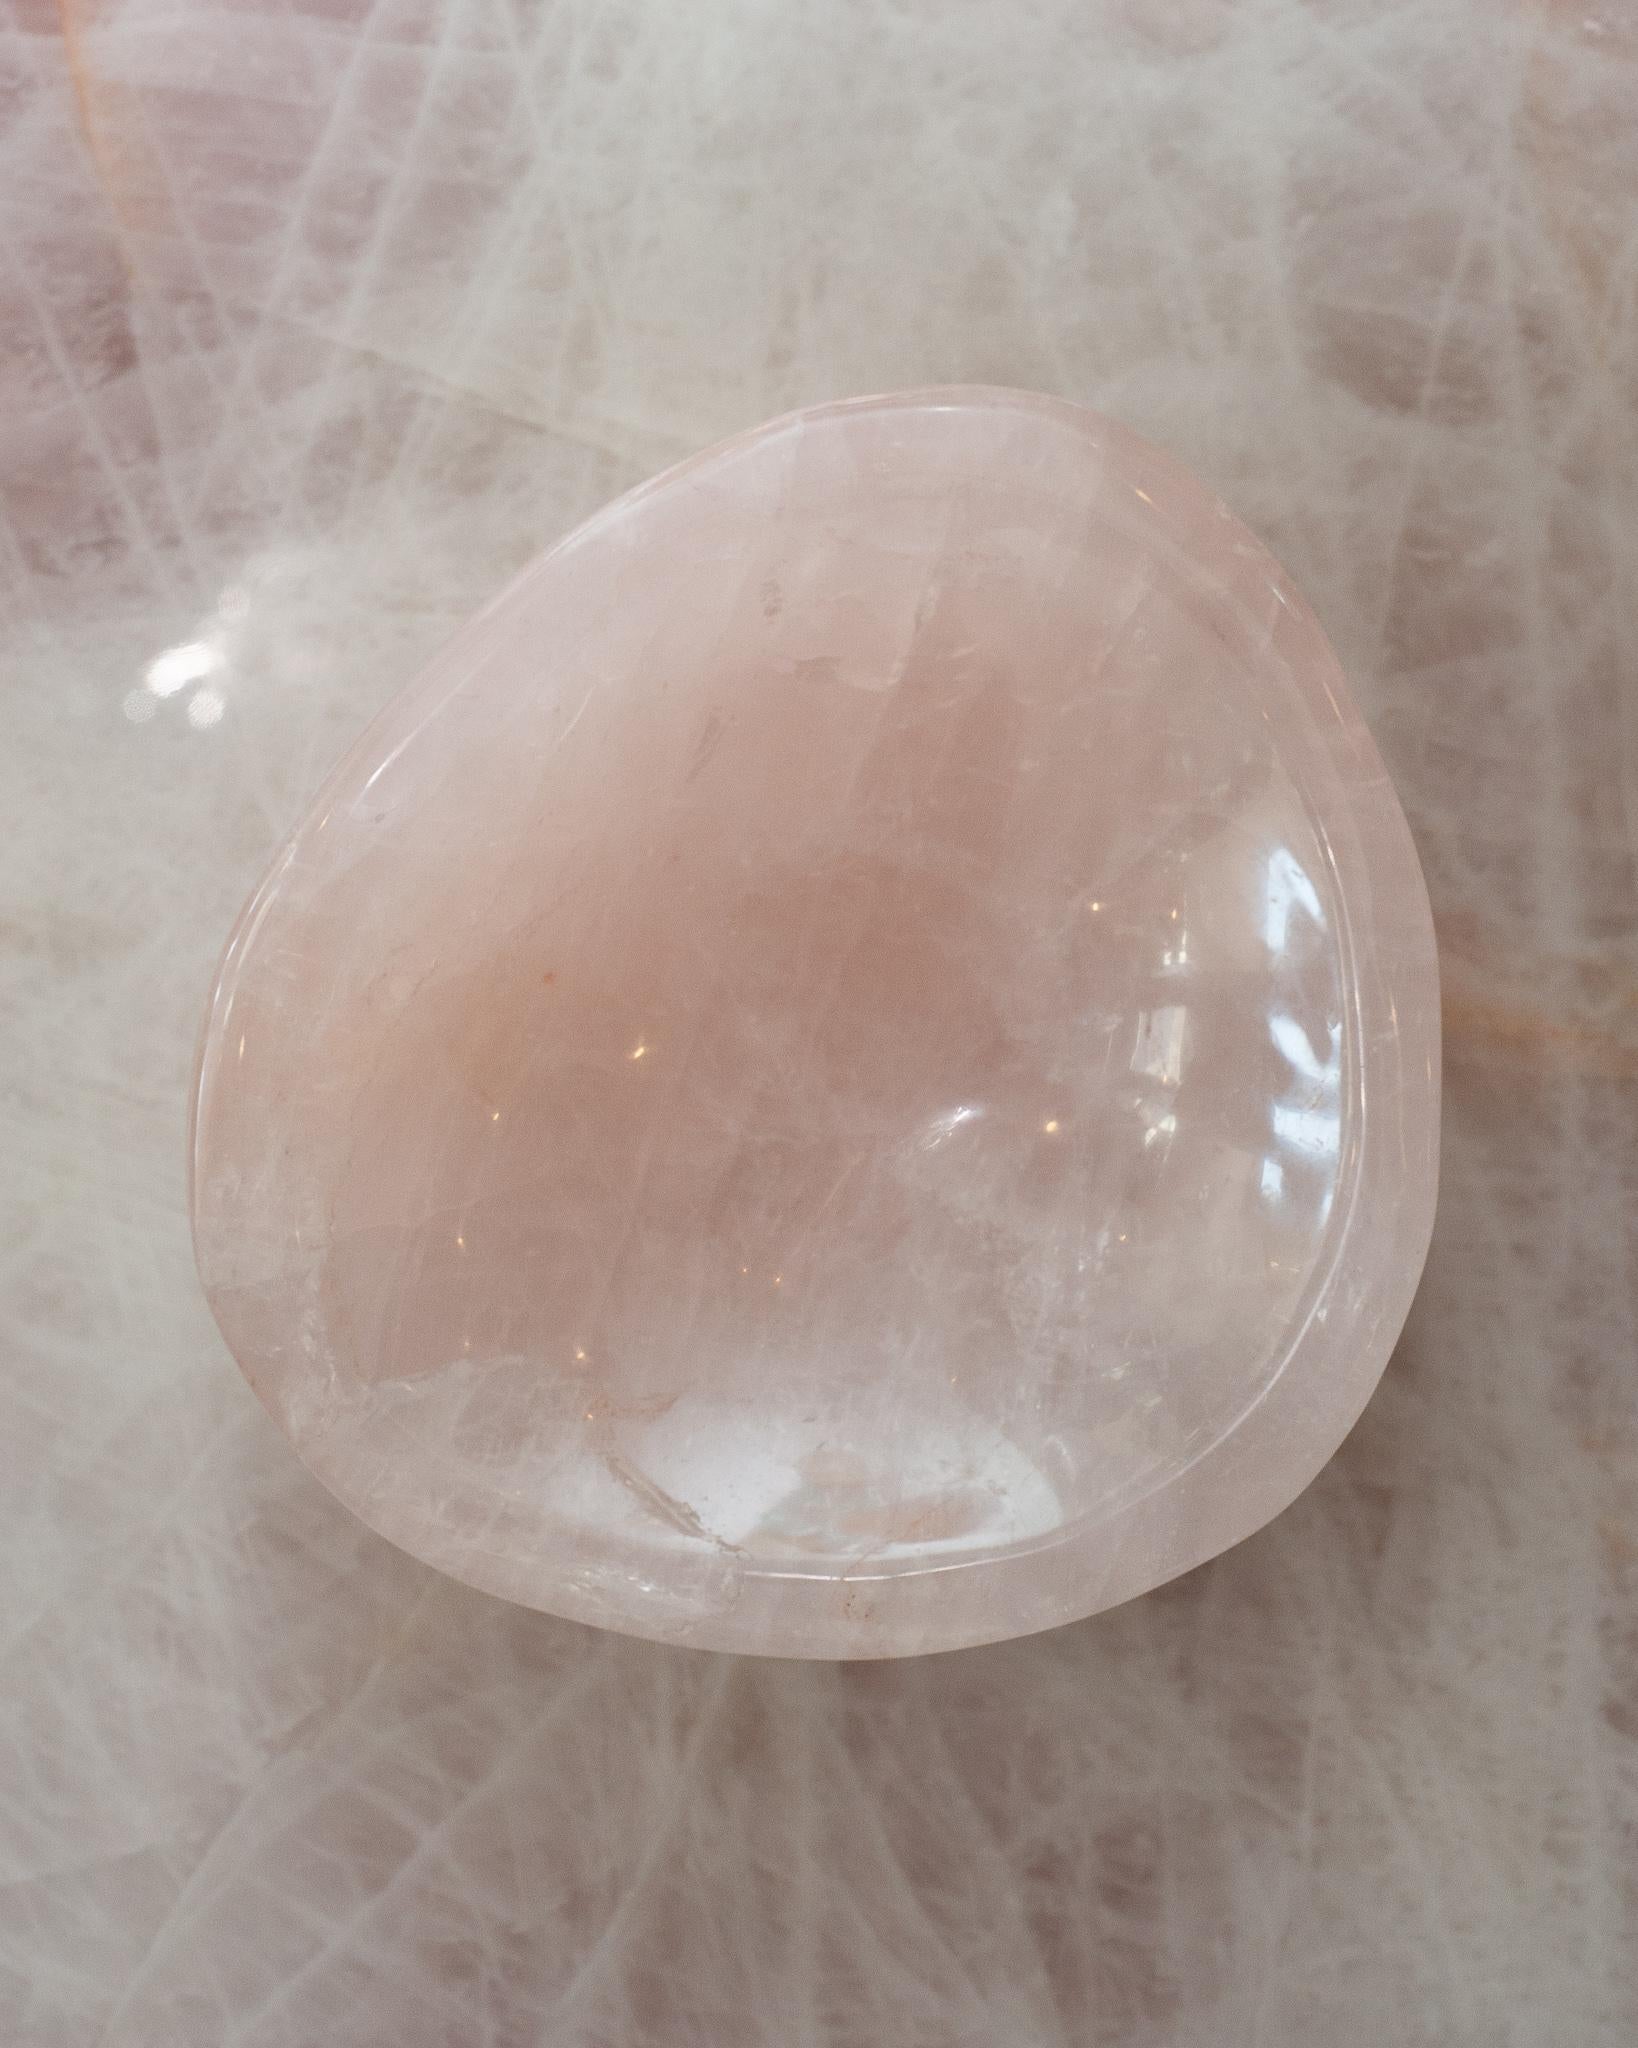 Bring the healing energy of rose quartz into your home with this beautiful carved bowl. This substantial and thick cut bowl can filled with candies or kept sculptural as an empty vessel and placed in any space. Rose quartz, the universal stone of